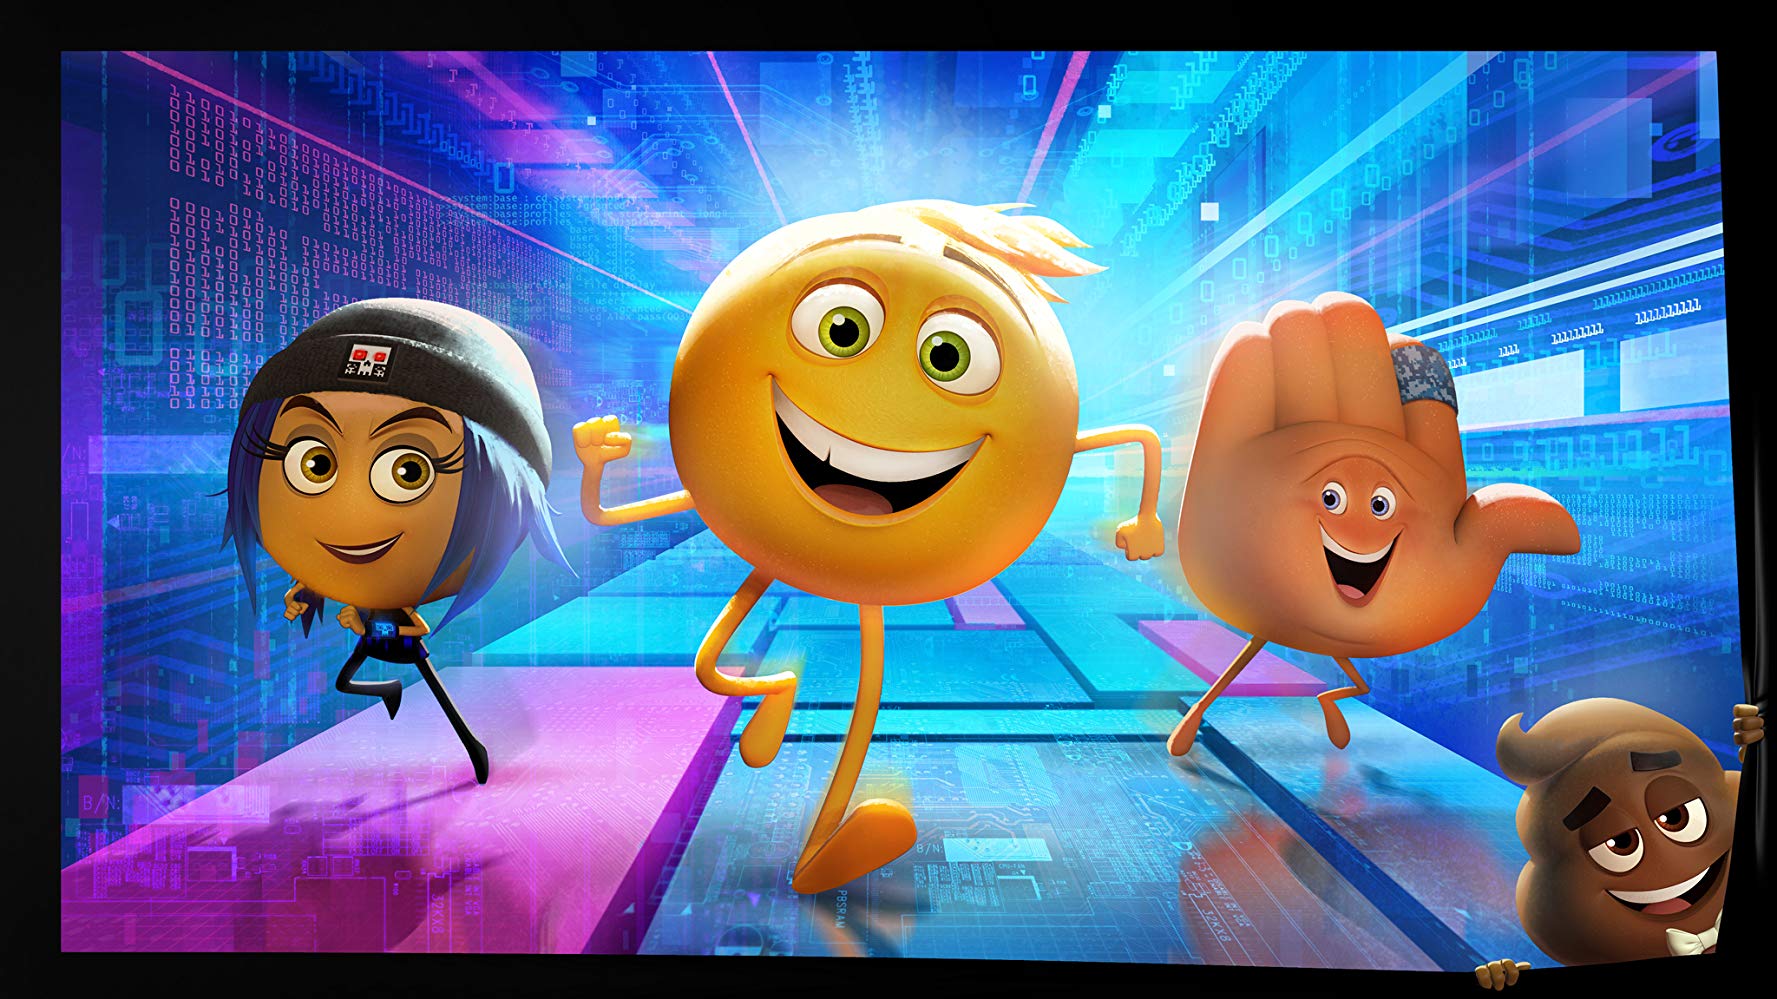 Jailbreak, Gene and H-5 with Poop peeking out of the edge of frame in The Emoji Movie (2017)